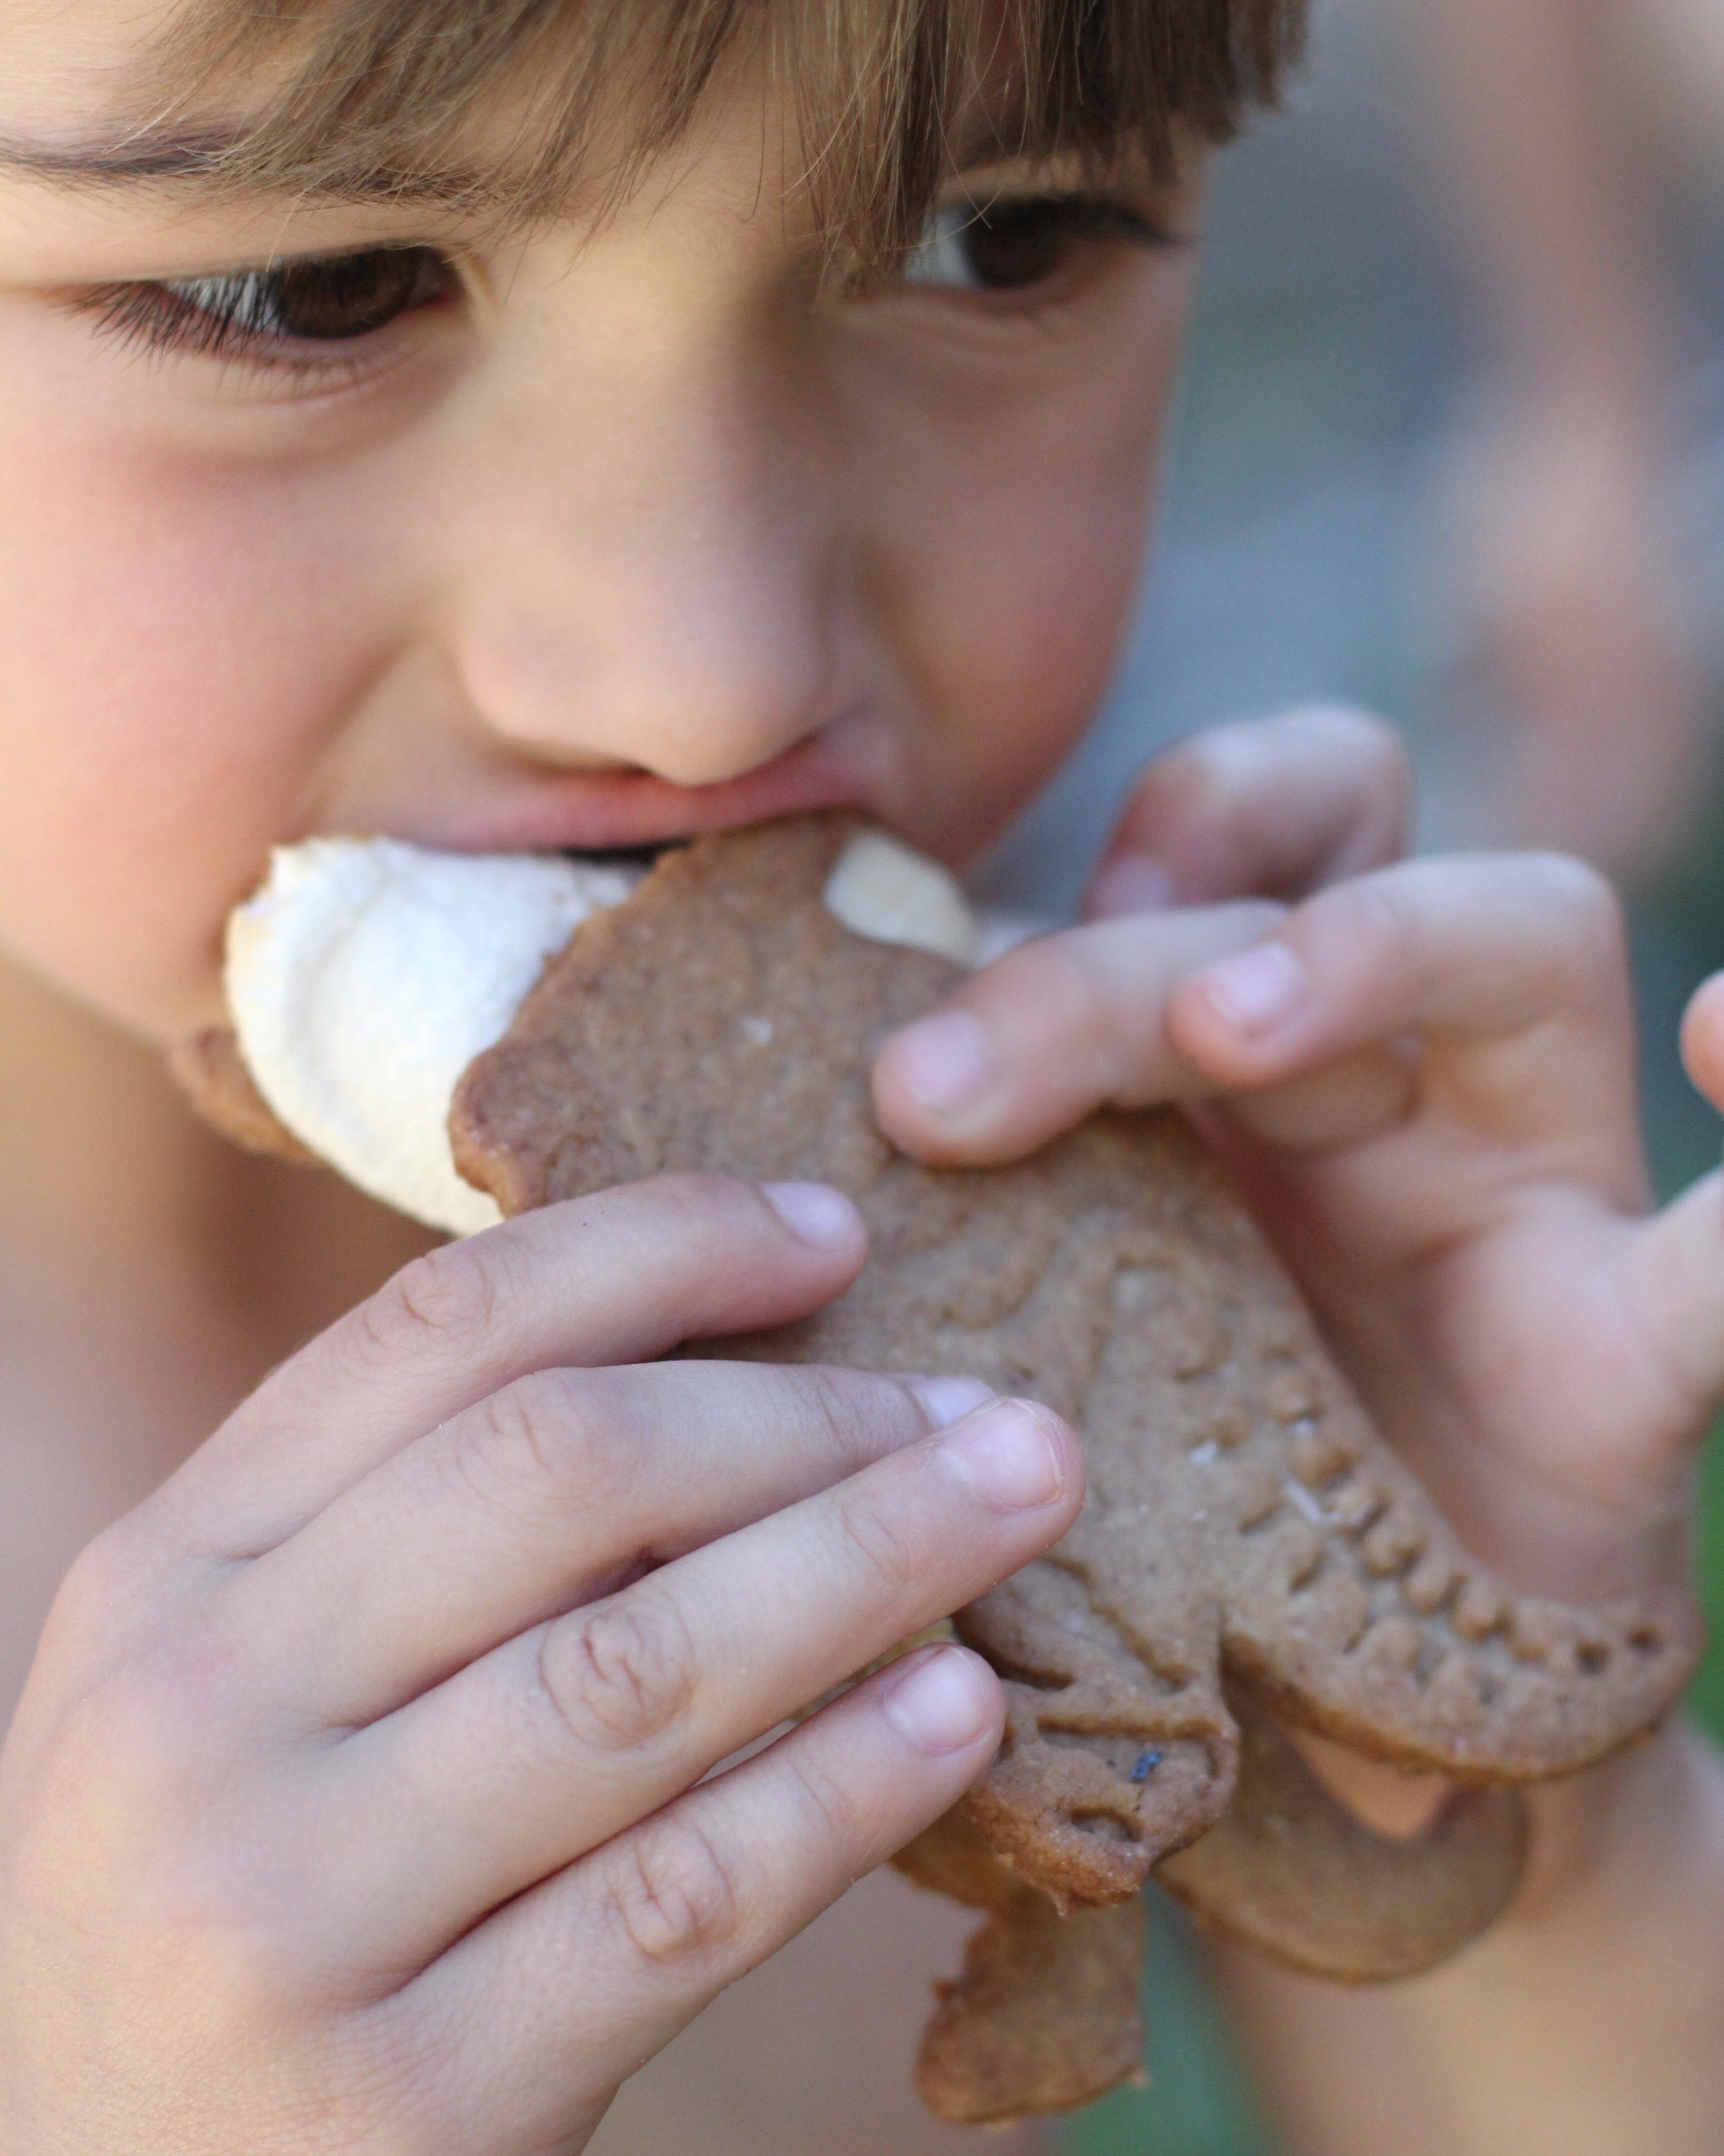 Dinosaur S'mores with homemade graham crackers by Tori Wesszer of Fraiche Nutrition